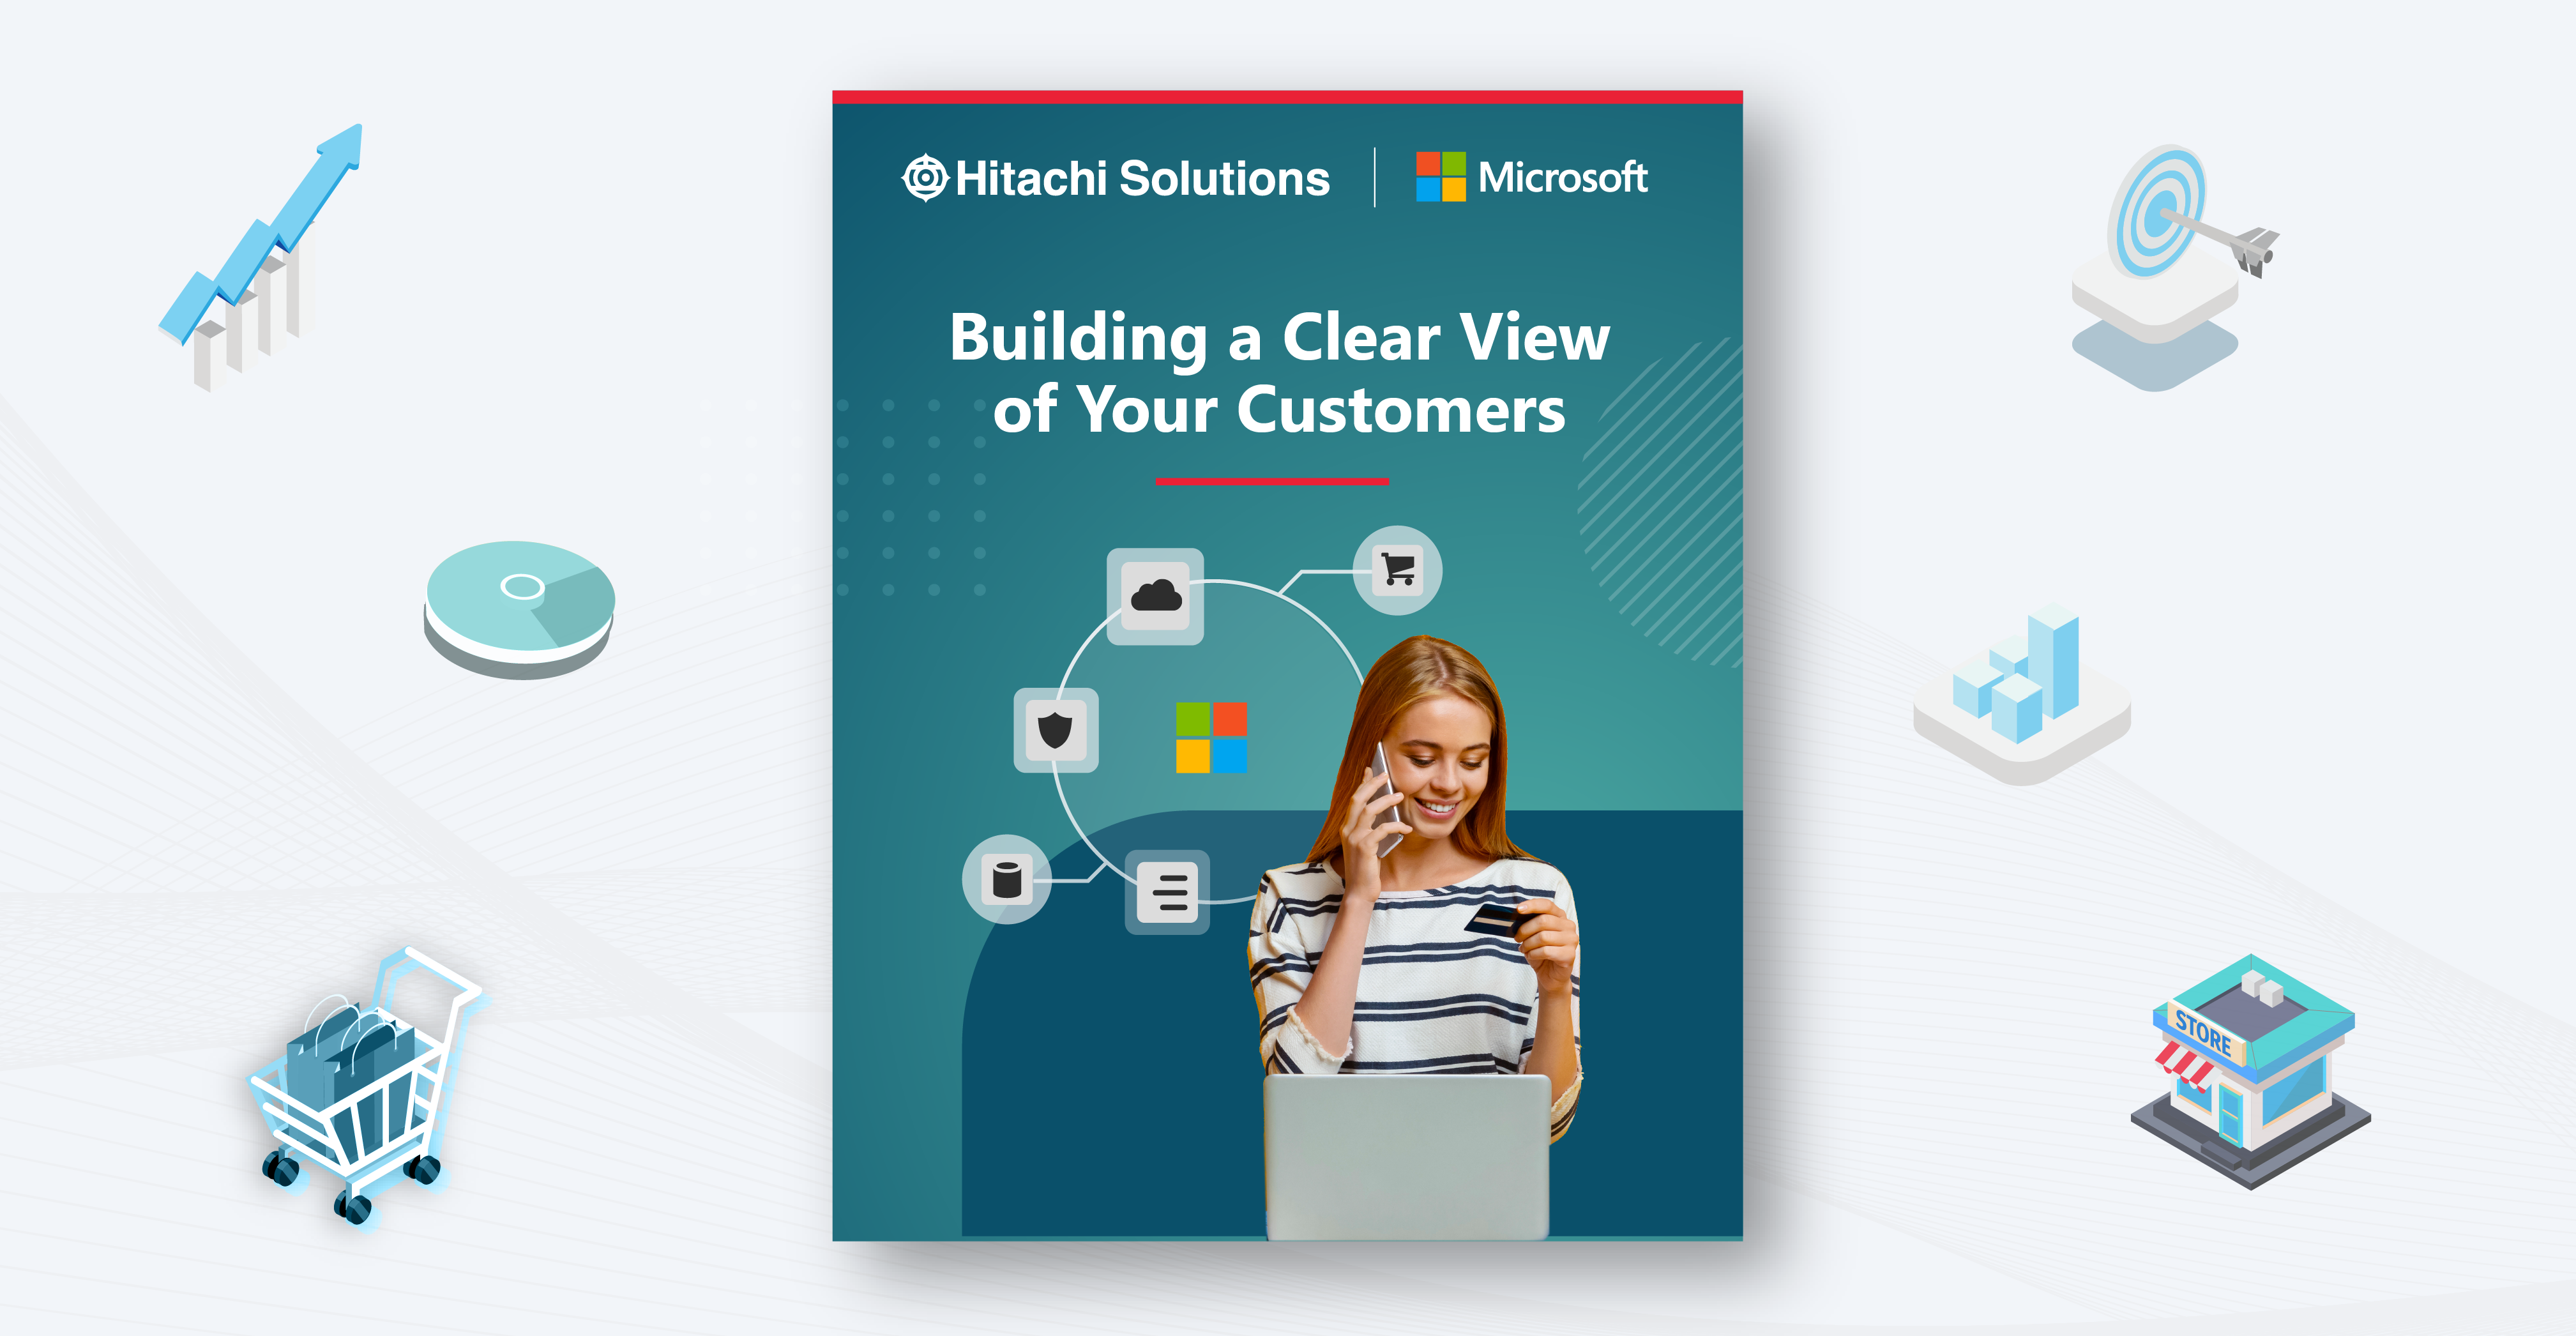 Building a Clear View of Your Customers